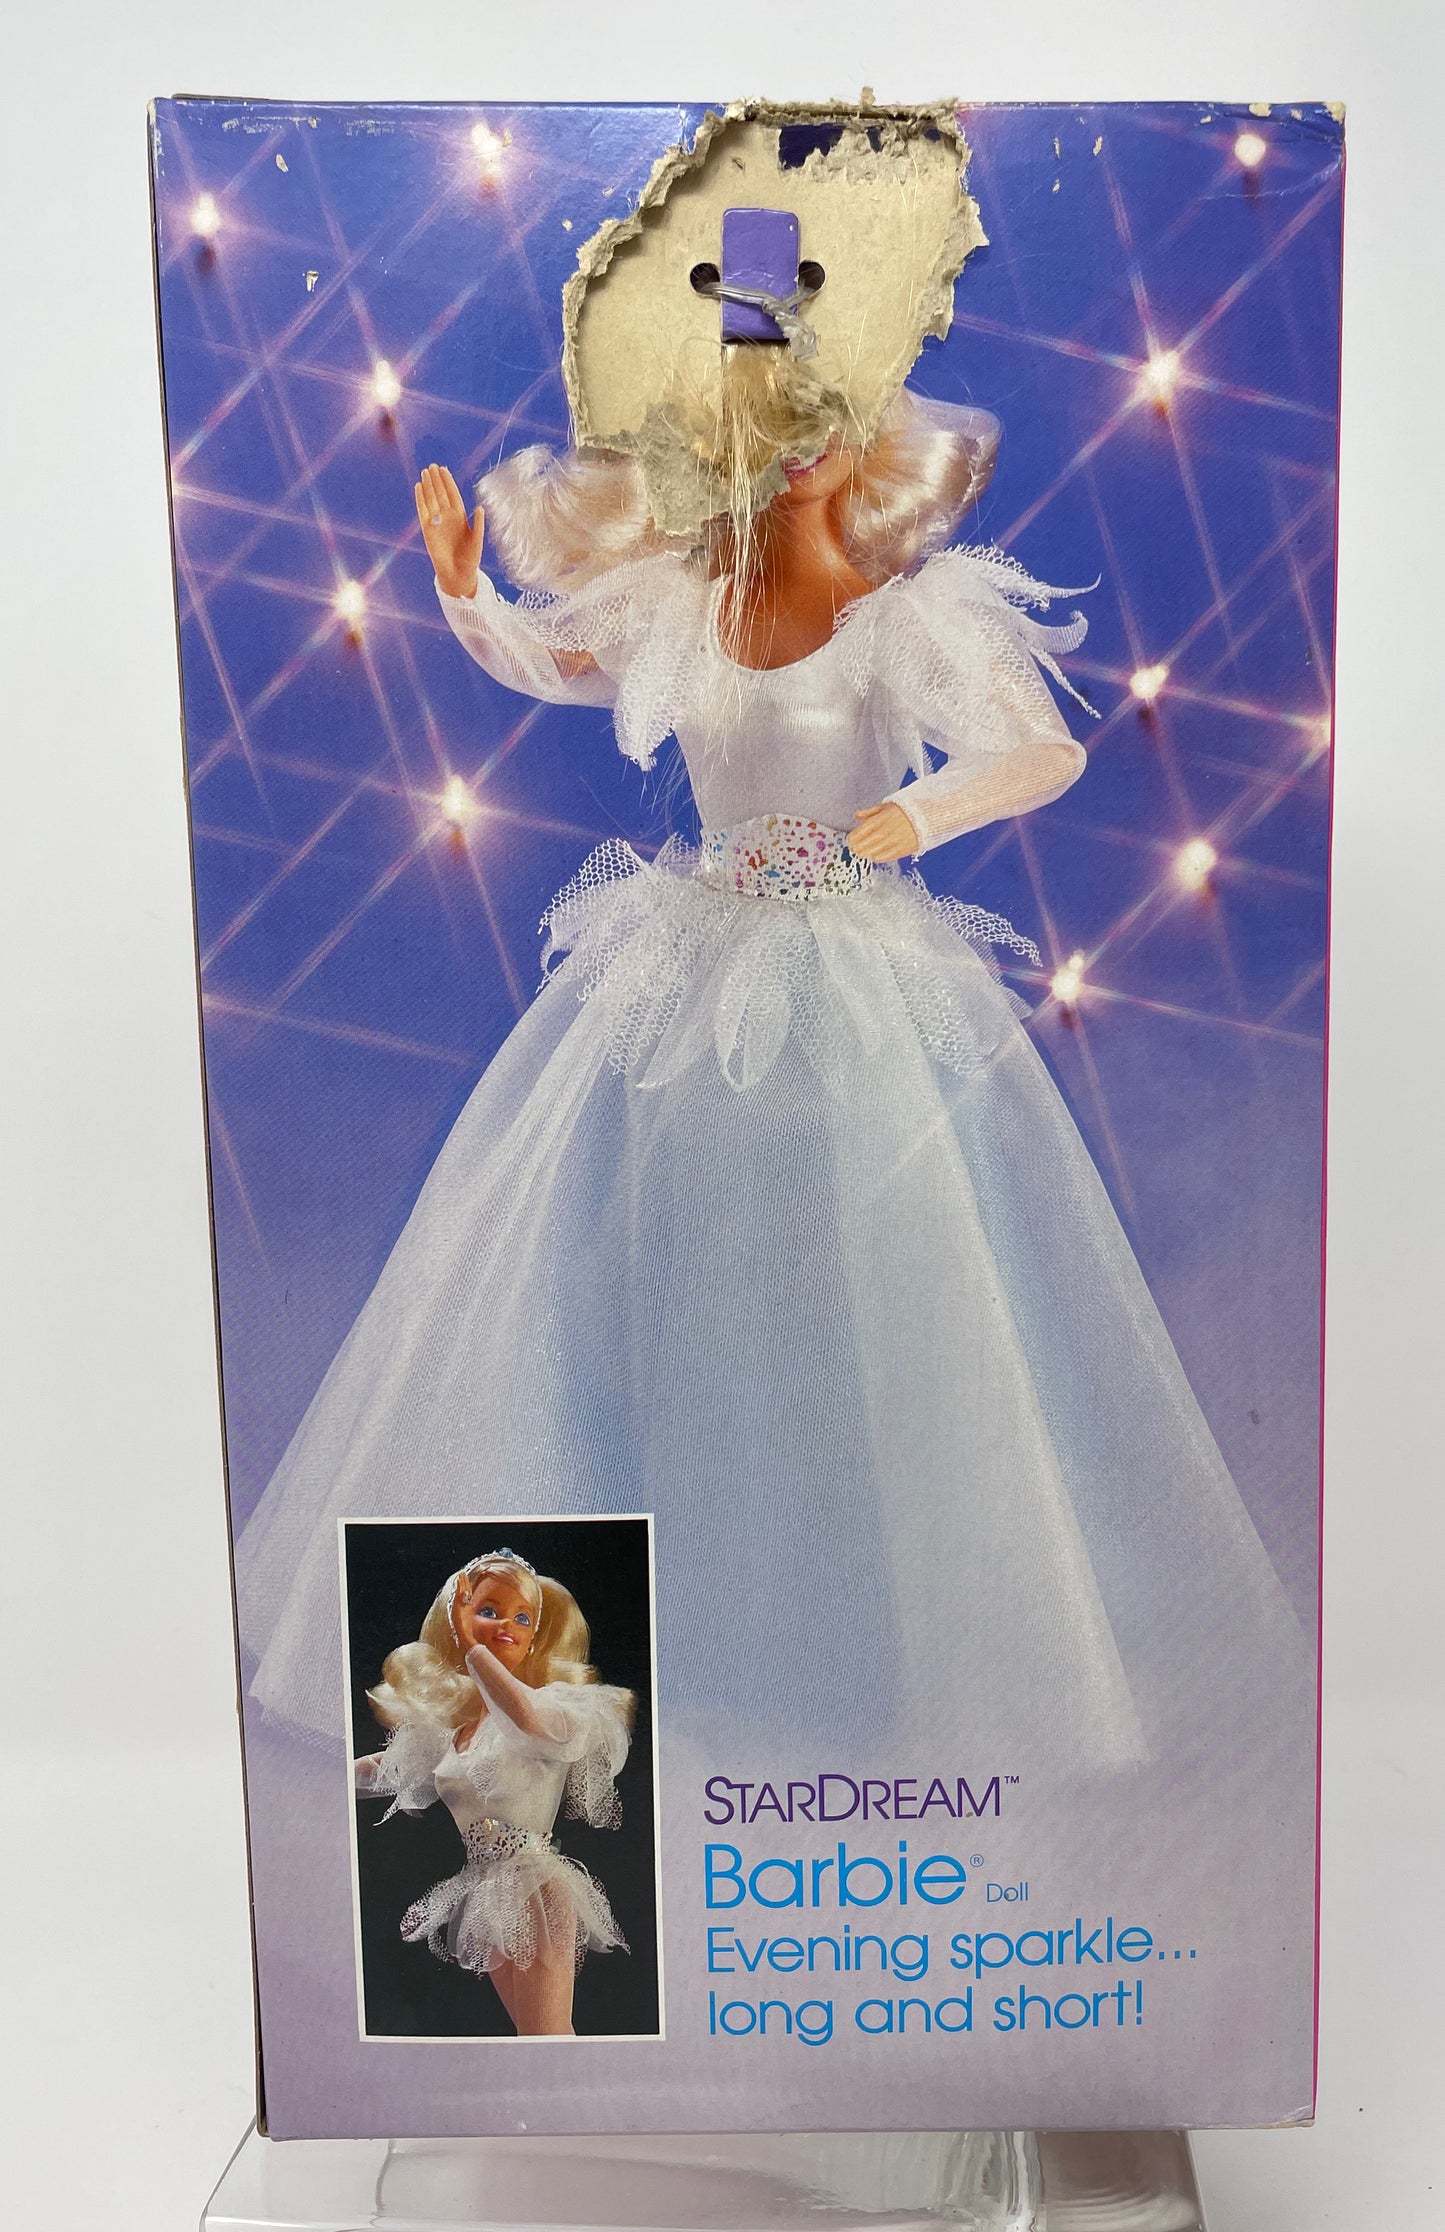 STARDREAM BARBIE *DAMAGED* - SEARS SPECIAL LIMITED EDITION #4550 - MATTEL 1987